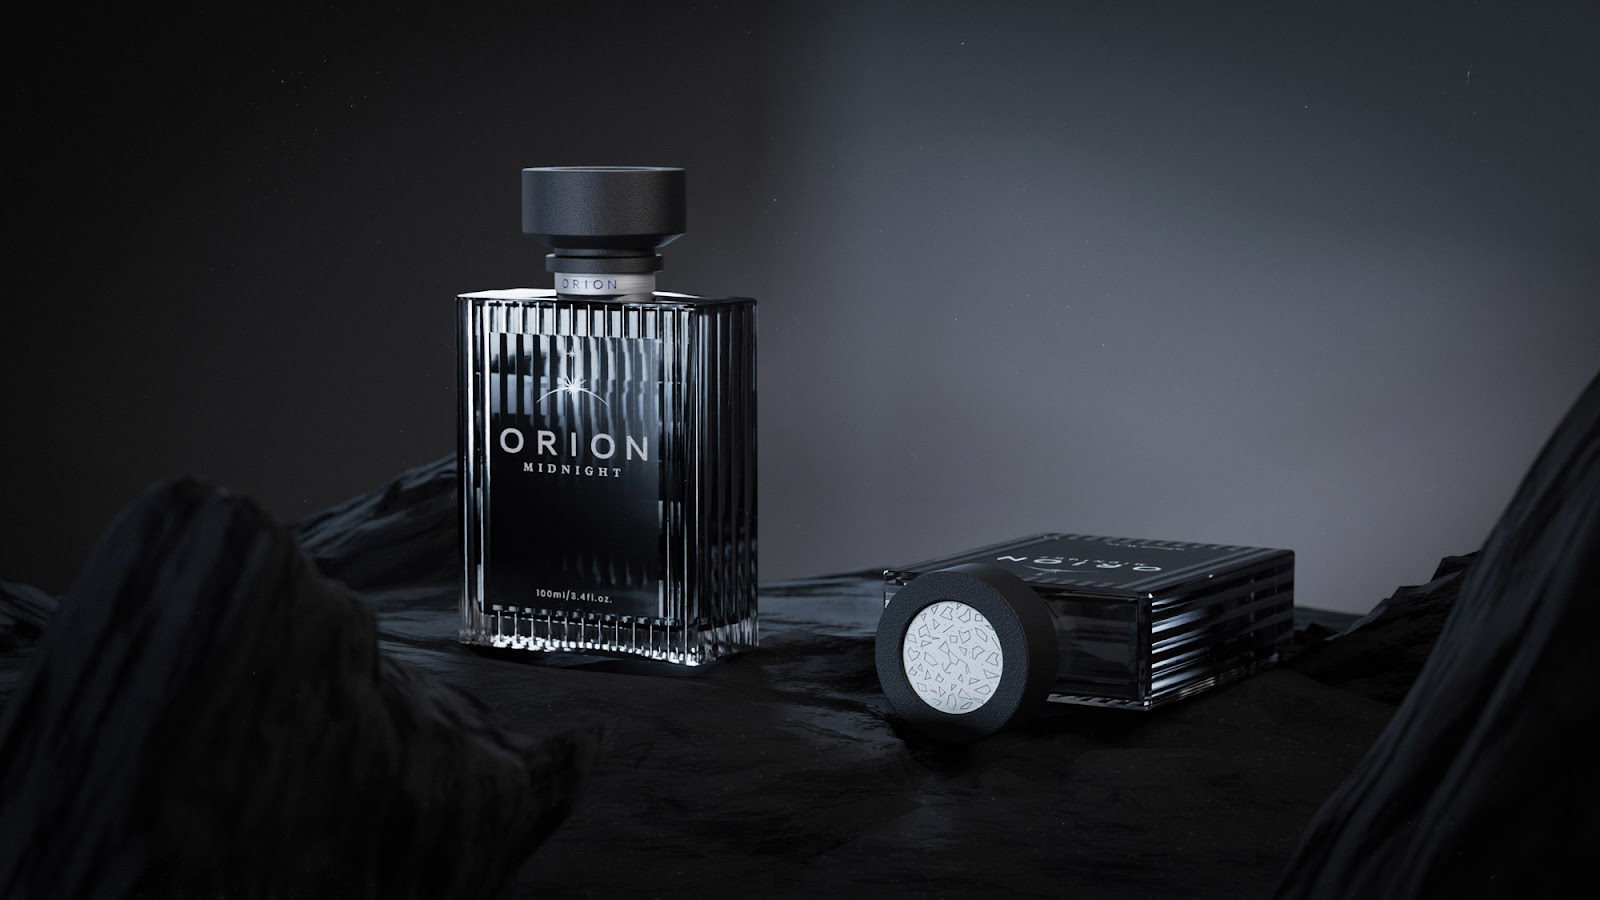 Branding and packaging design artifacts for Orion Midnight product designed by Studio Alpeto